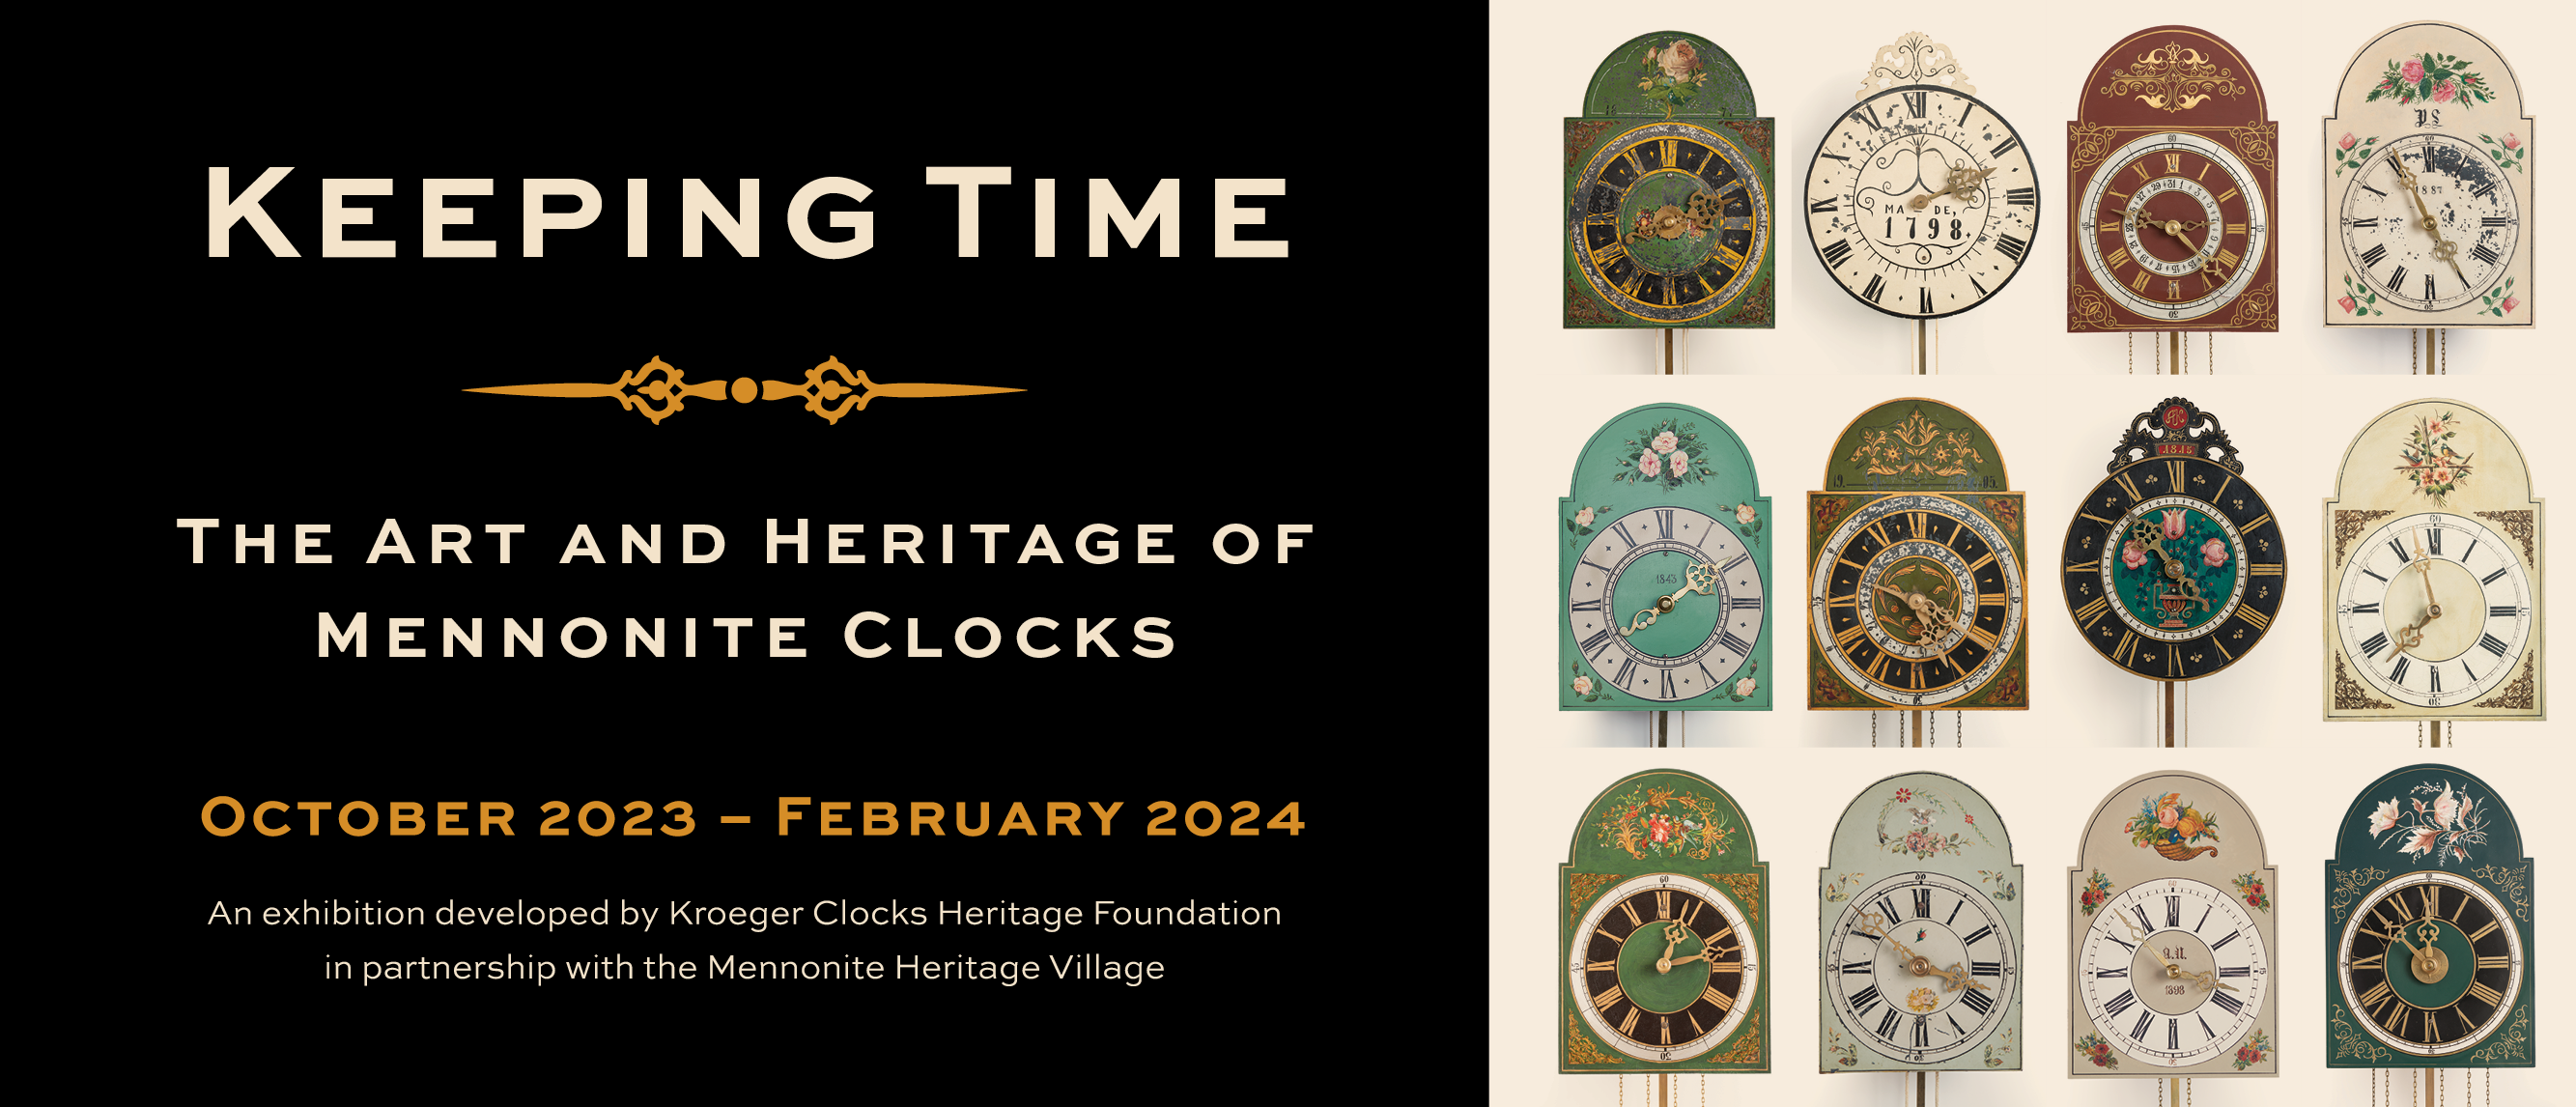 A word graphic featuring a photograph of twelve highly decorative clocks. The clock faces are all decorated in different colours and designs. To the left of the image, text reads, “Keeping Time / The Art and Heritage of Mennonite Clocks / October 2023 – February 2024 / An exhibition developed by Kroeger Clocks Heritage Foundation in partnership with the Mennonite Heritage Village”.